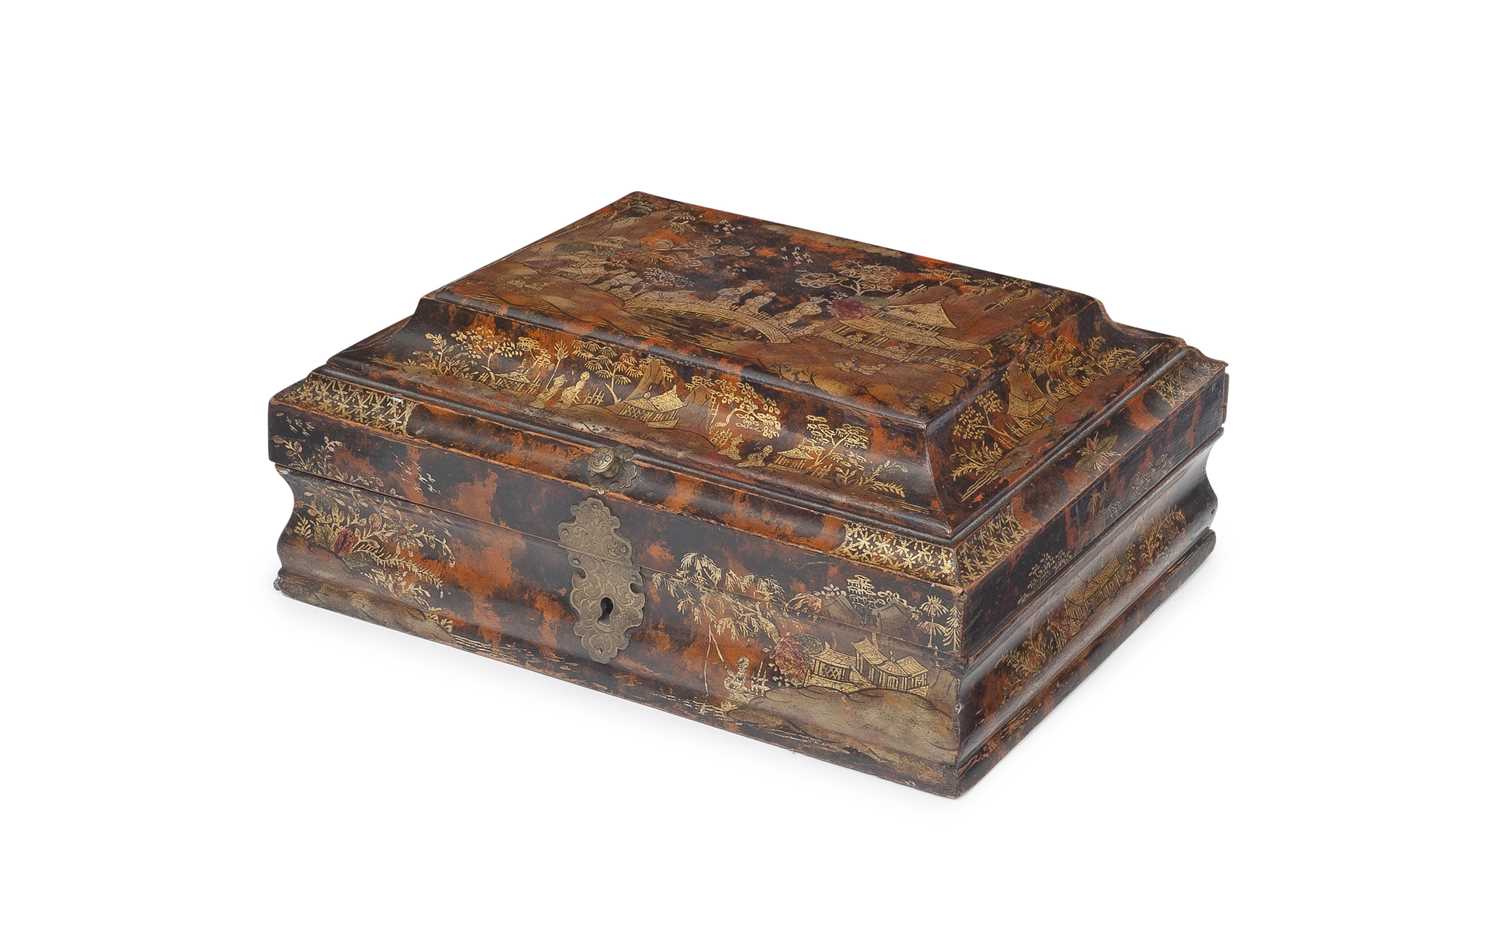 A FINE 18TH CENTURY CHINOISERIE DECORATED AND FAUX TORTOISESHELL PAINTED BOX - Image 4 of 4